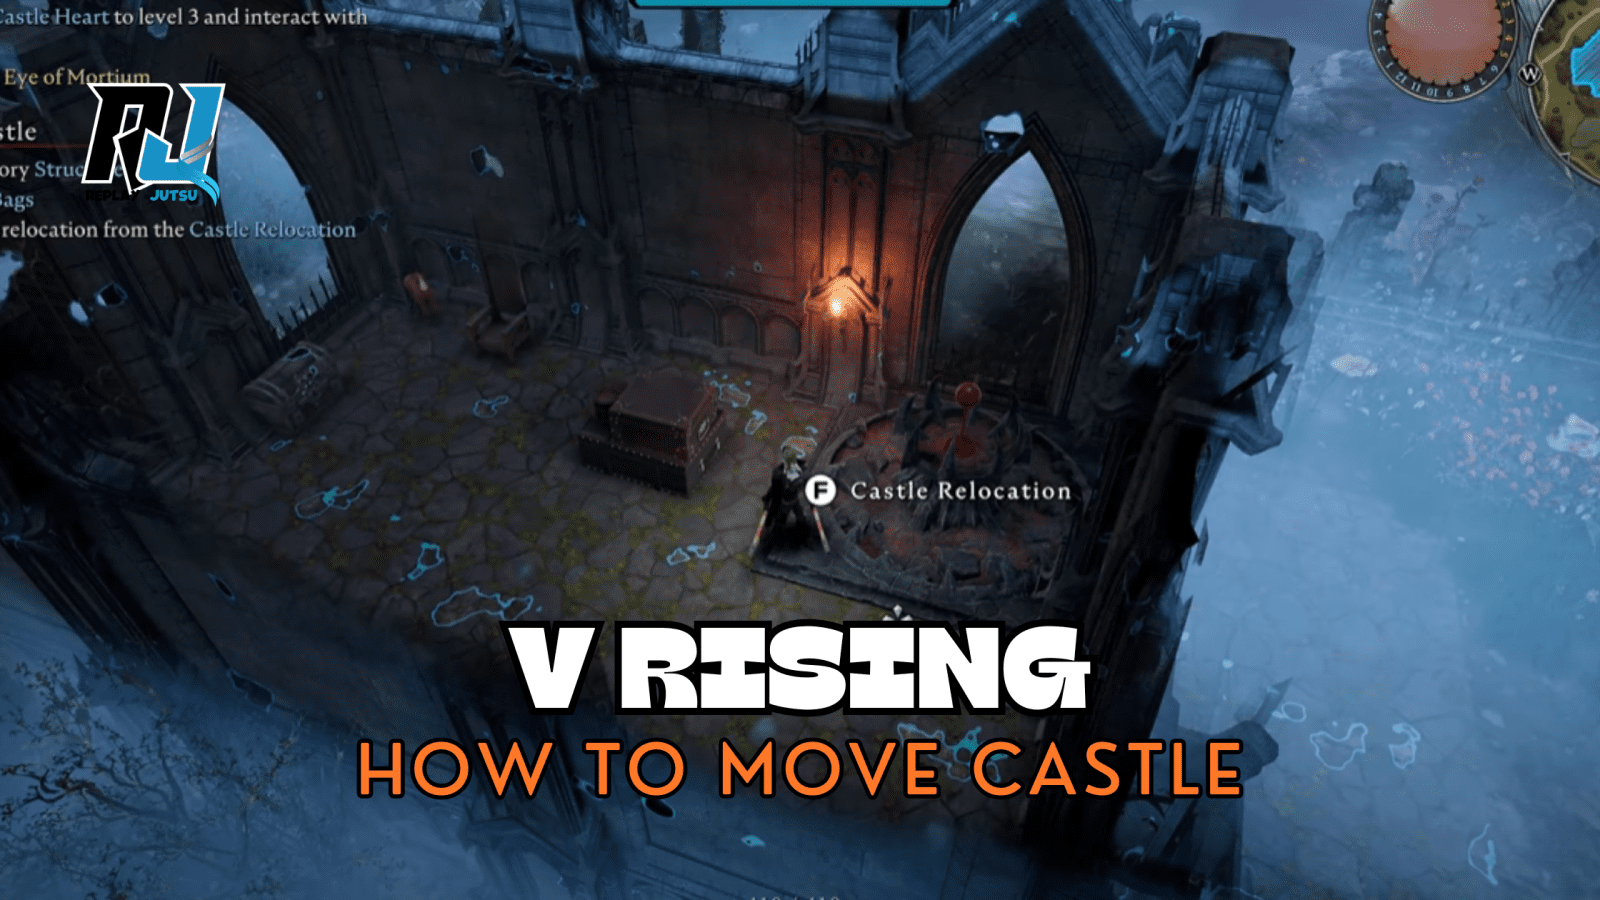 How To Move Castle in V Rising 1.0